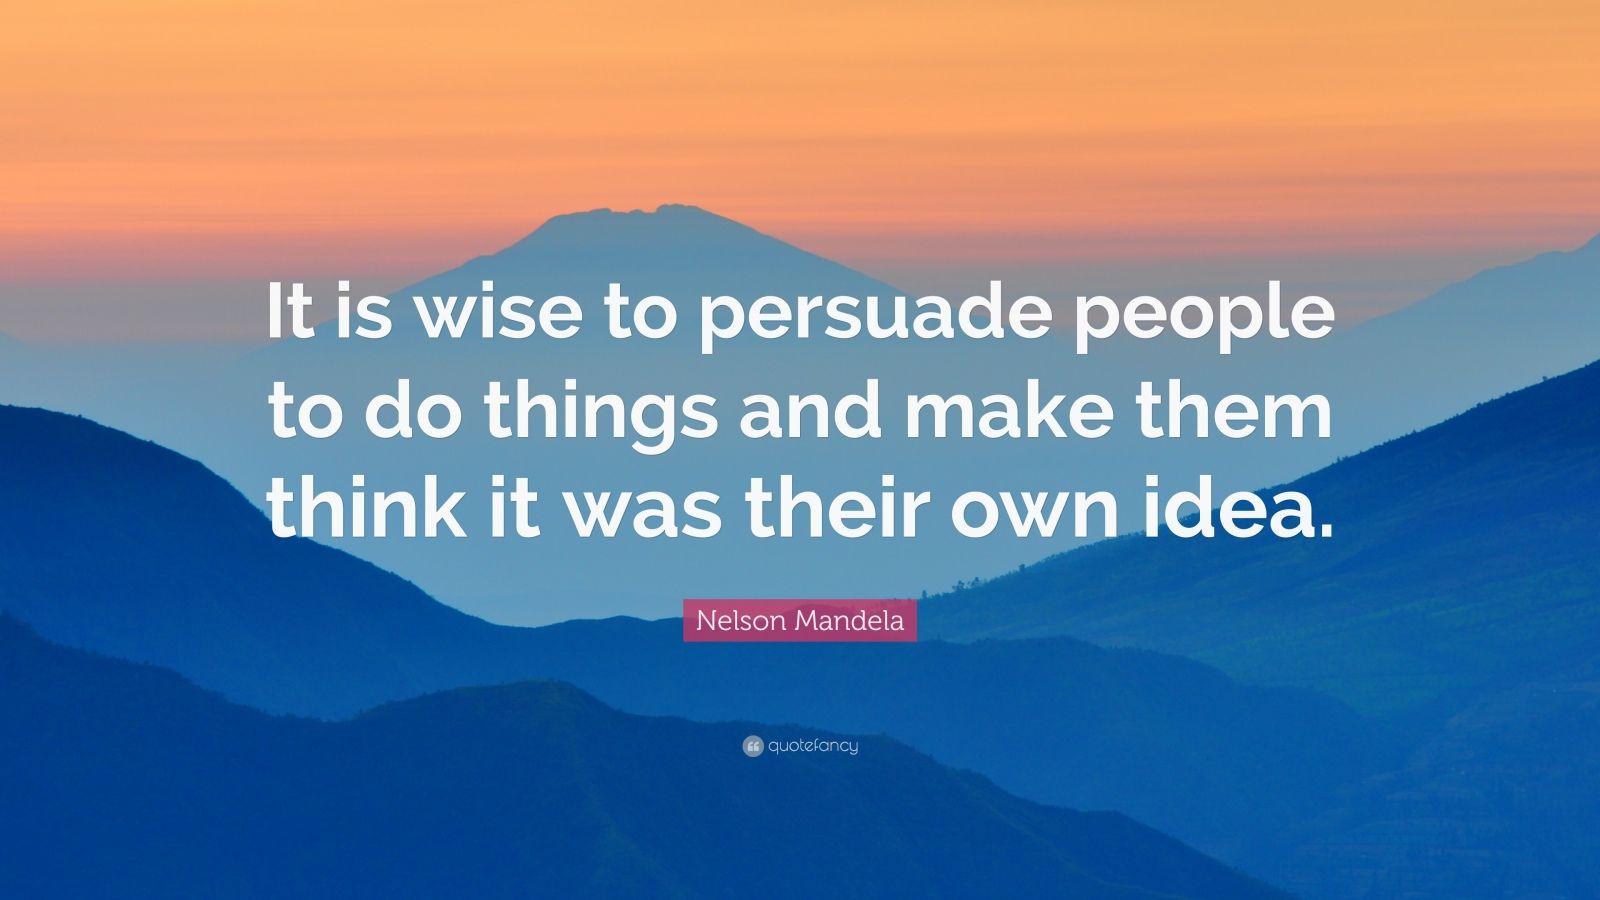 Nelson Mandela Quote: “It is wise to persuade people to do things and